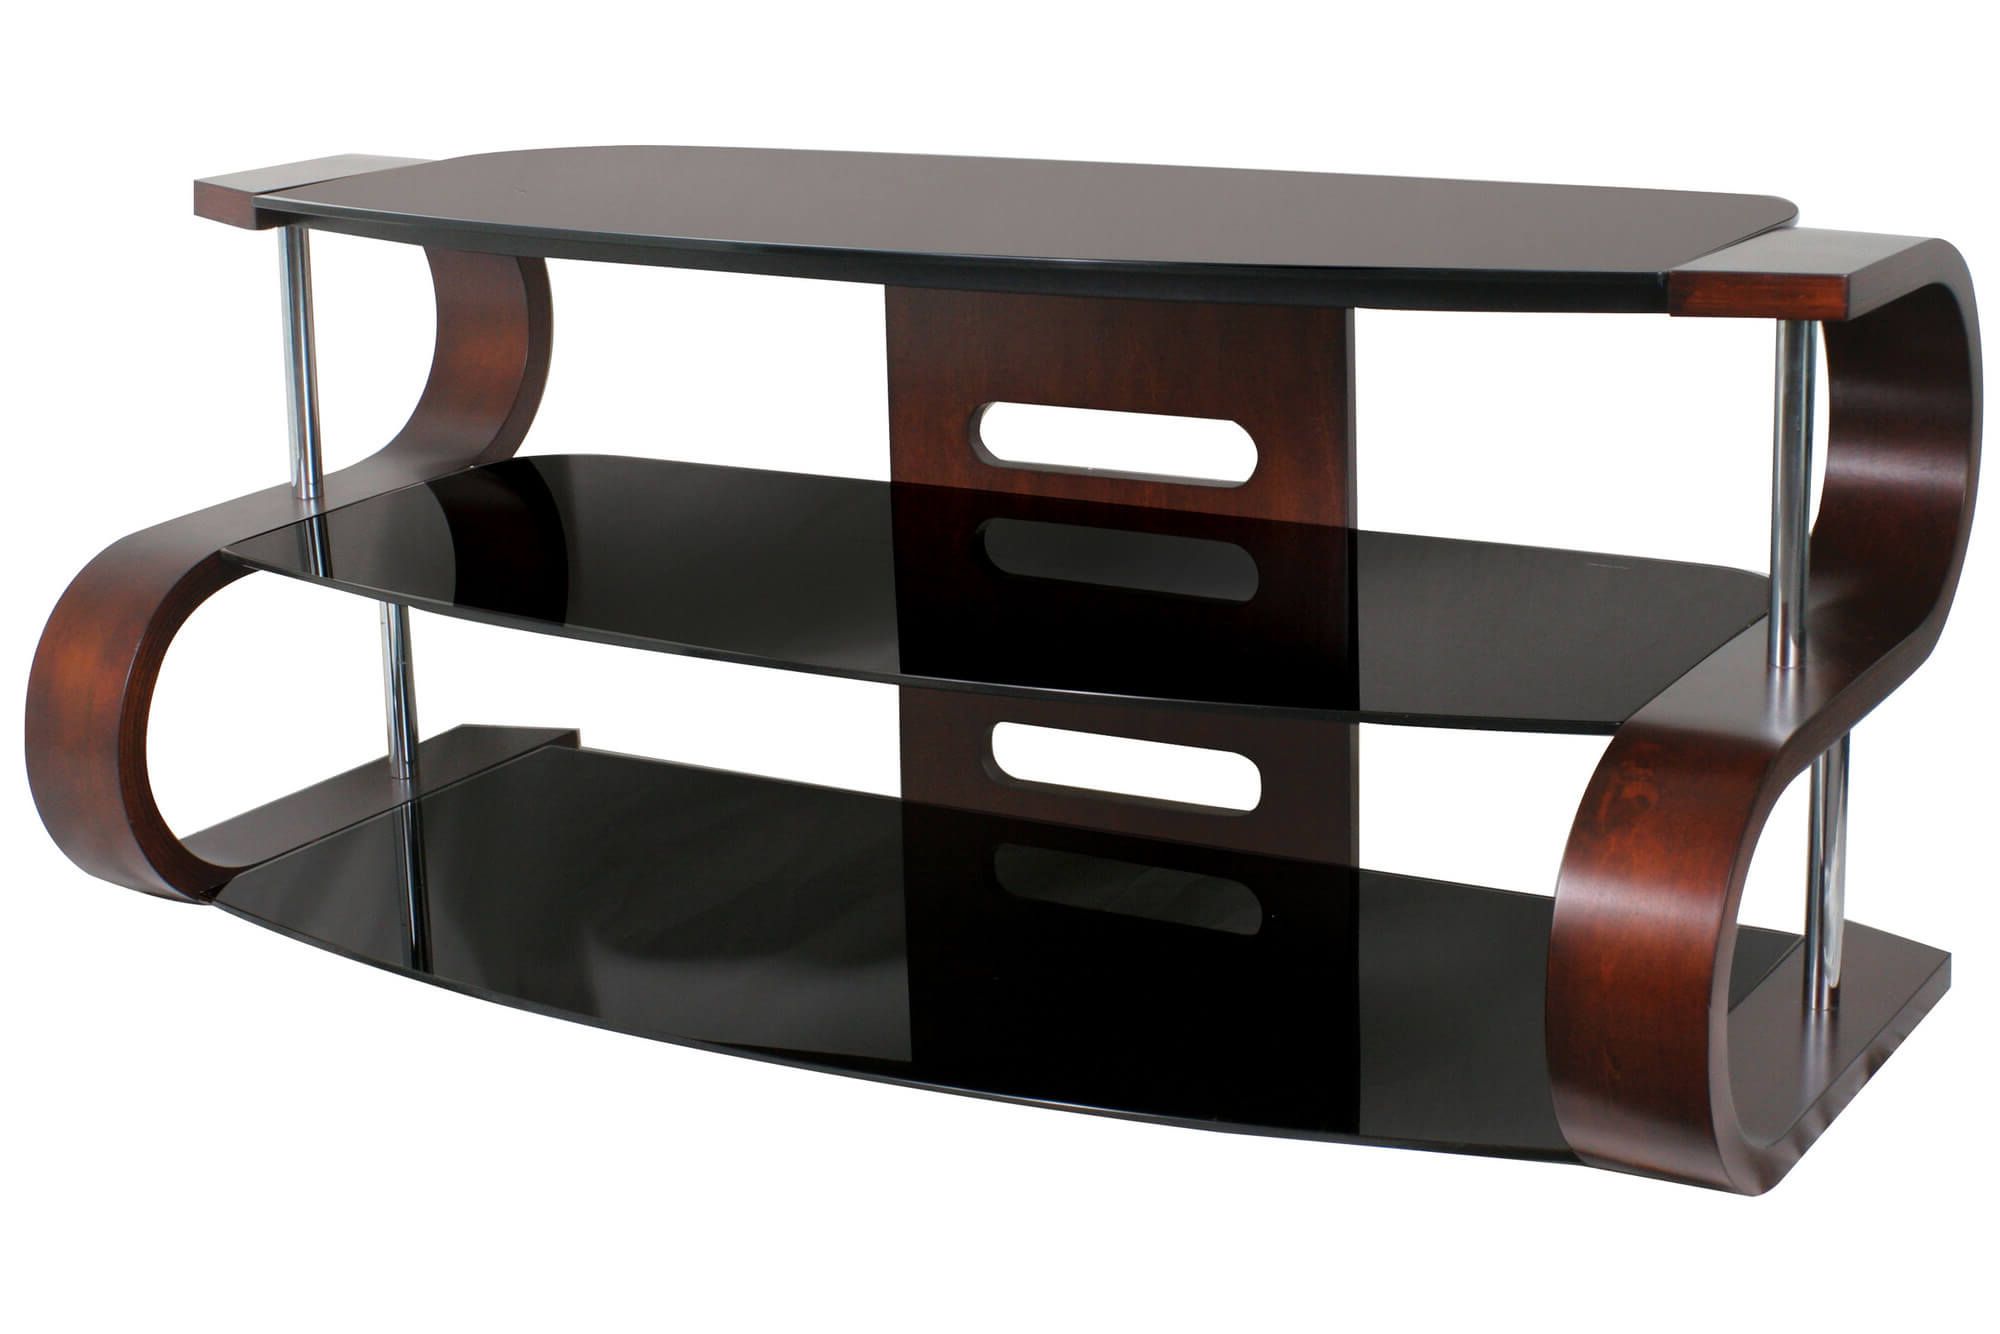 Smoked Glass Tv Stands Intended For Most Up To Date 16 Types Of Tv Stands (comprehensive Buying Guide) (View 1 of 20)